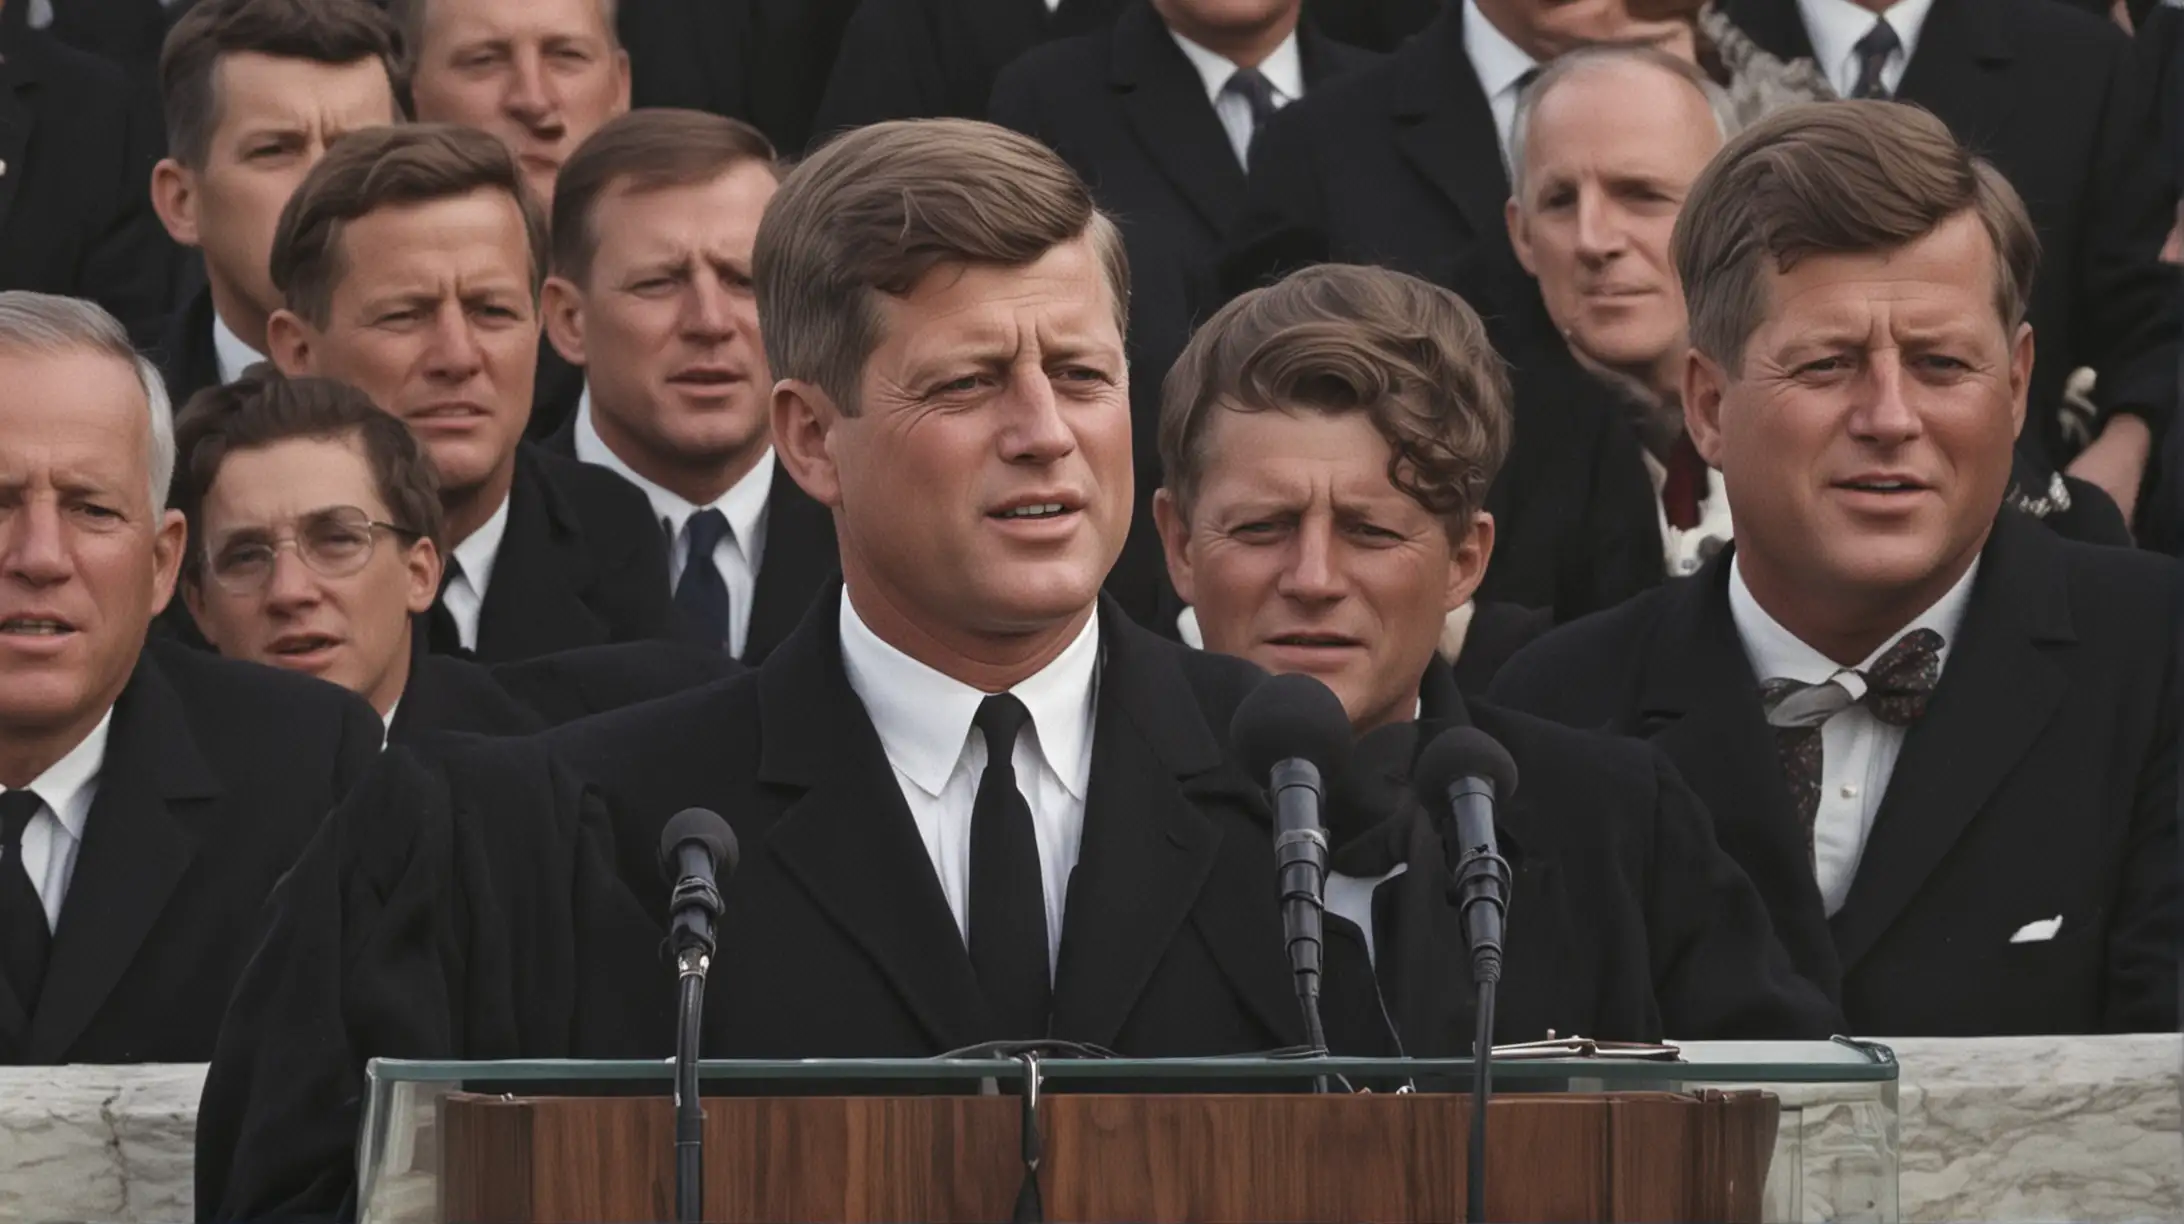 President Kennedy Delivers Inspirational Inaugural Address